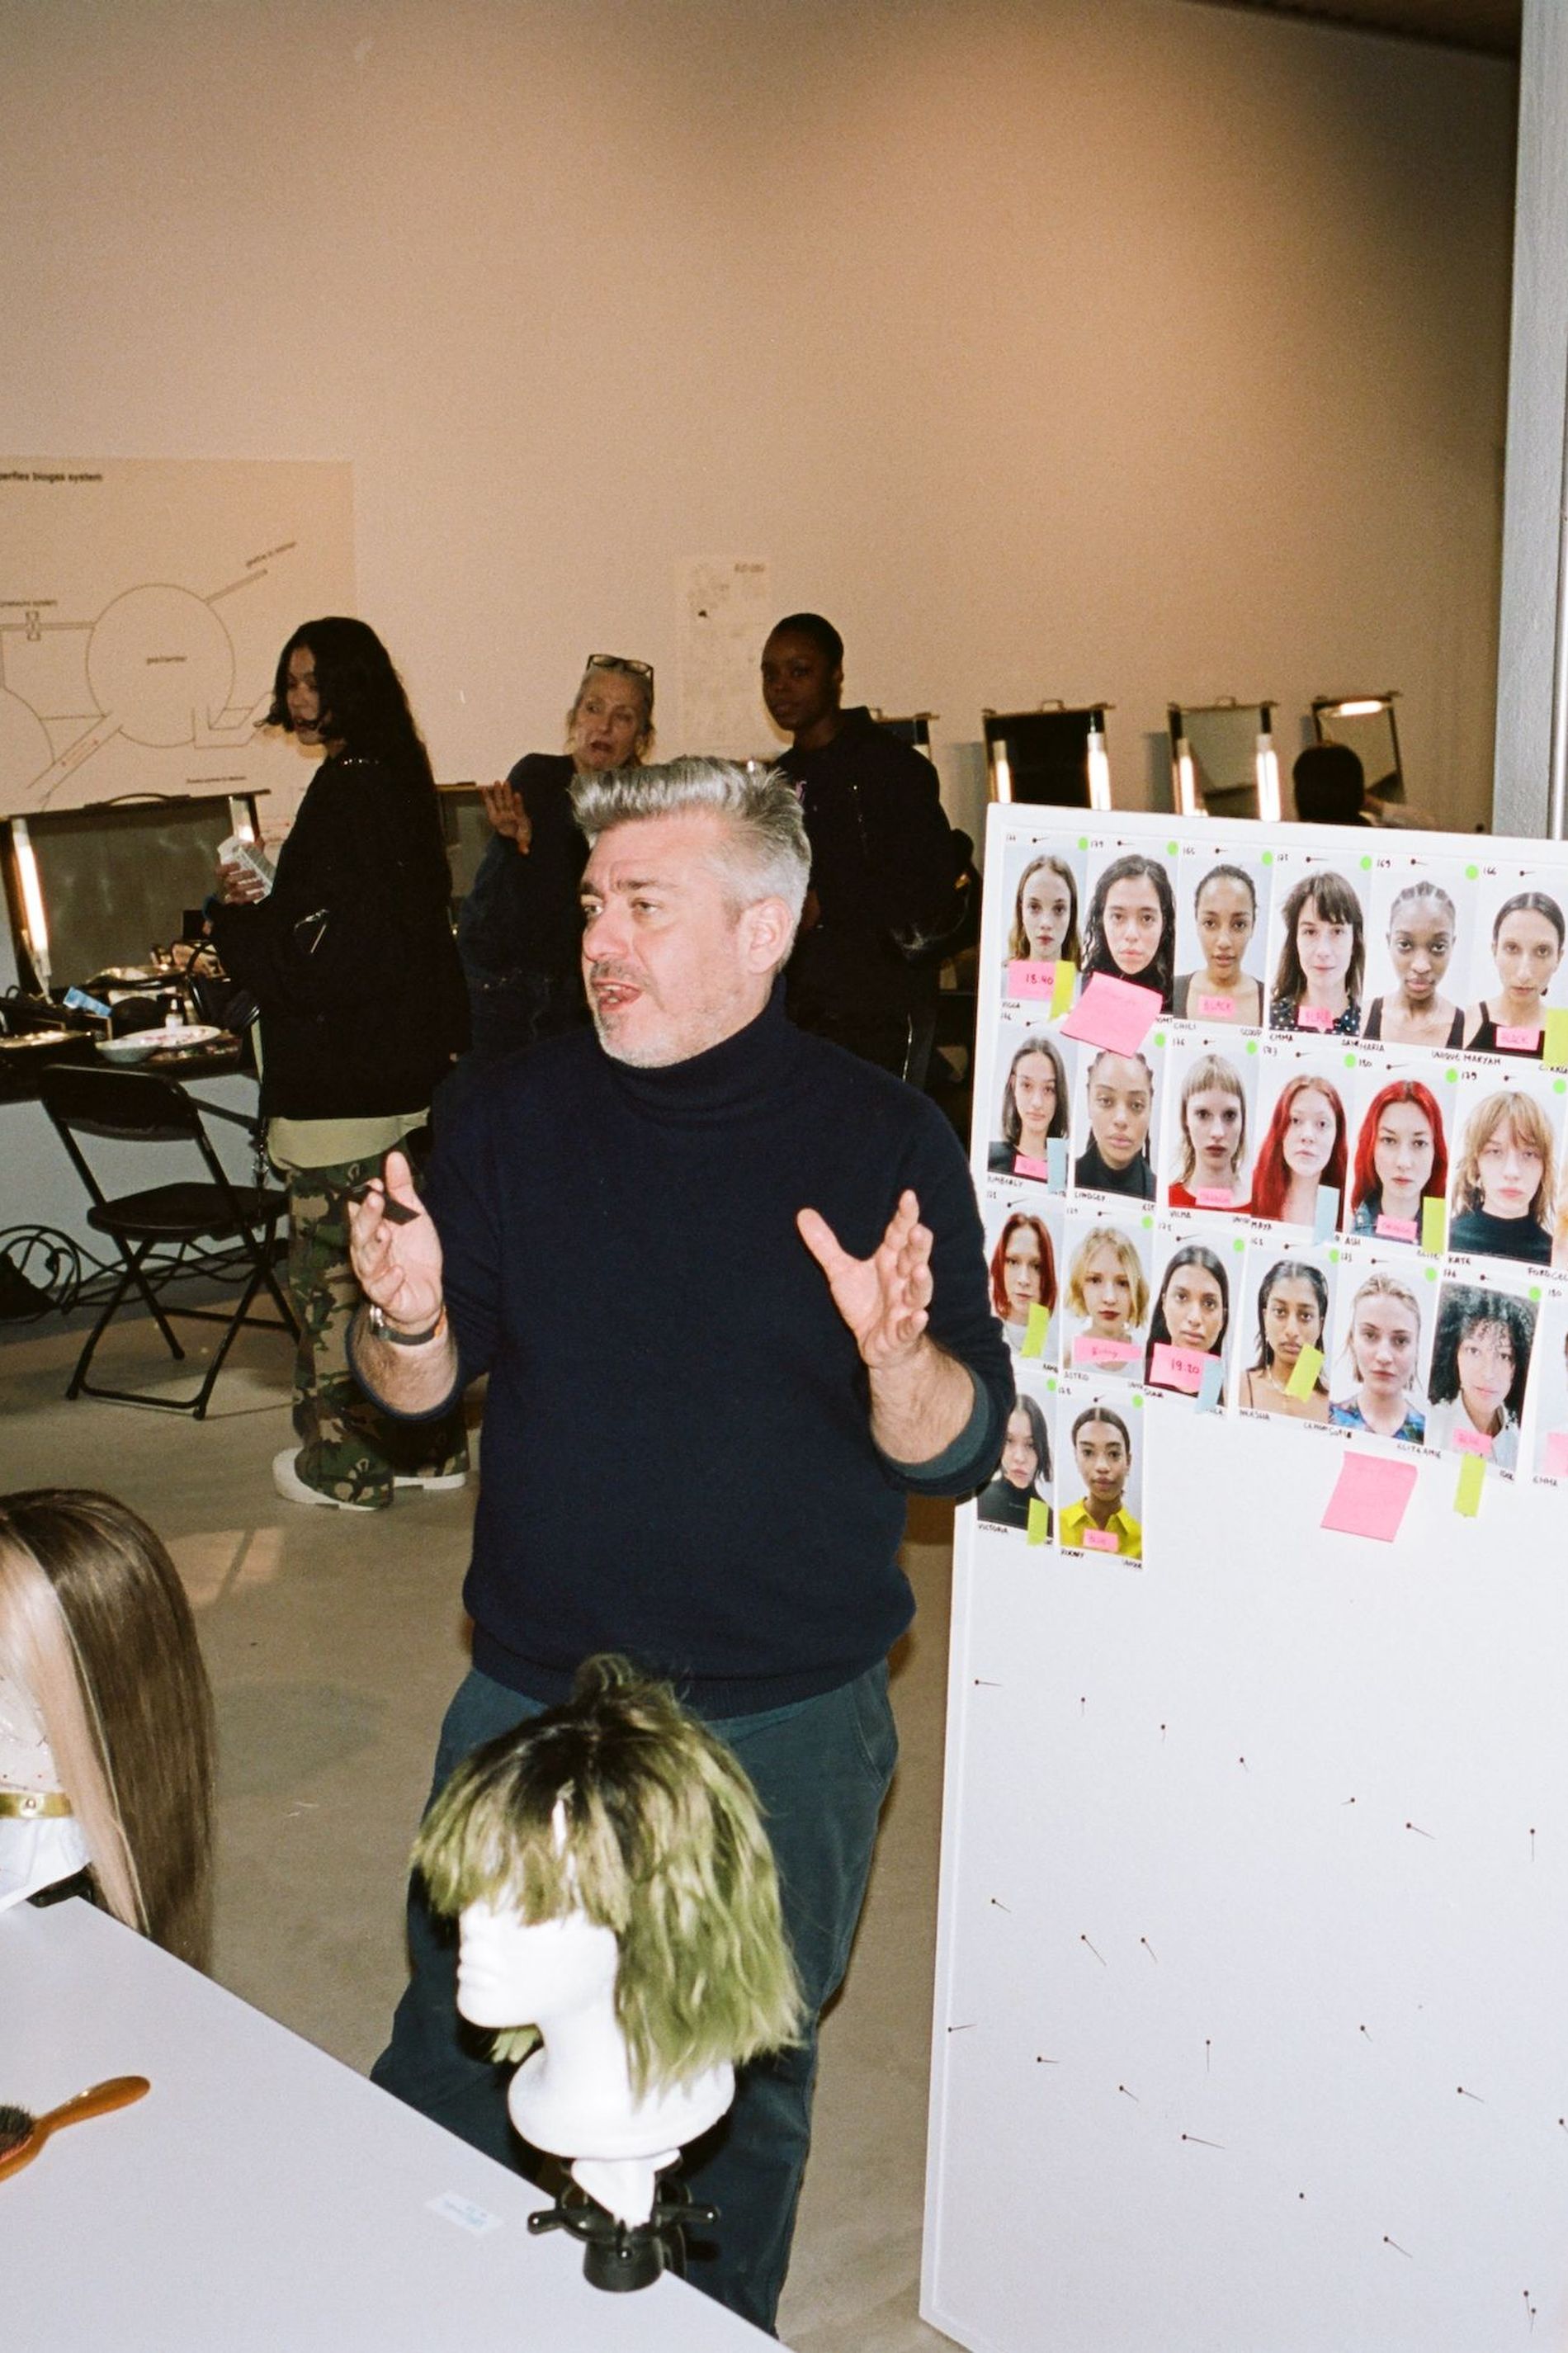 Cim Mahony briefs the team ahead of the show on the makeup looks in front of a look board